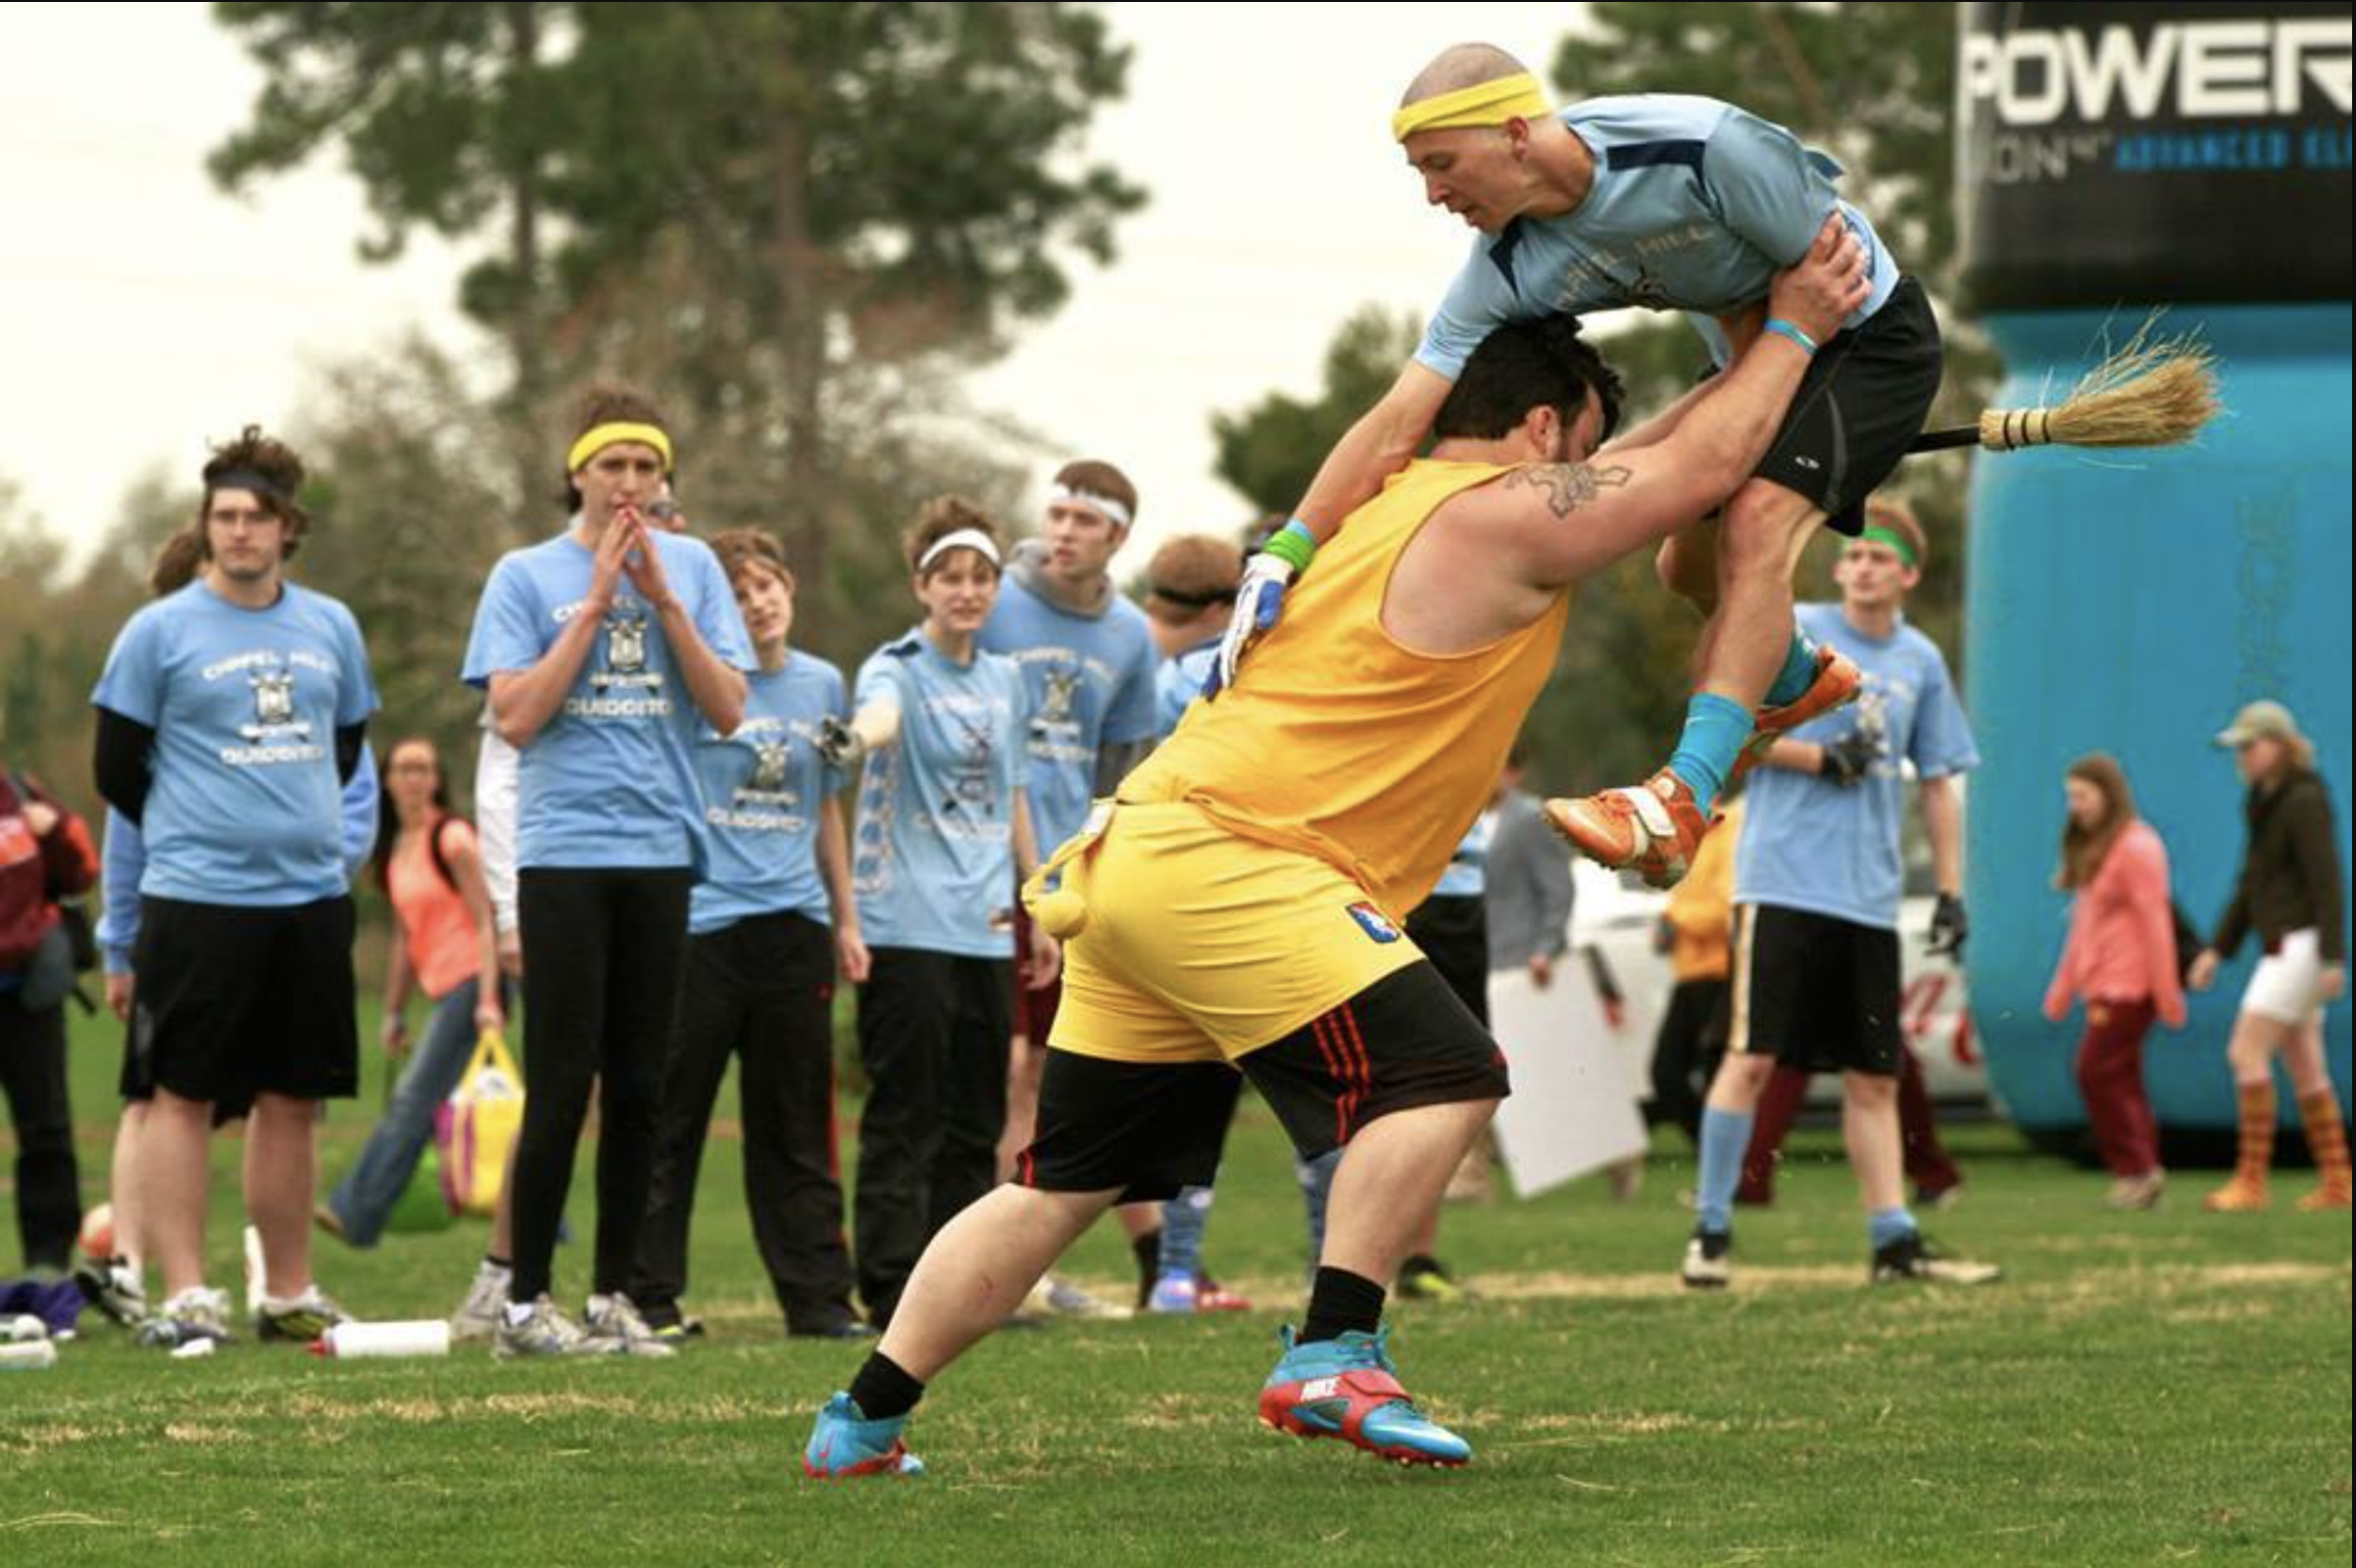 One person clashes with another during a game of Quidditch.